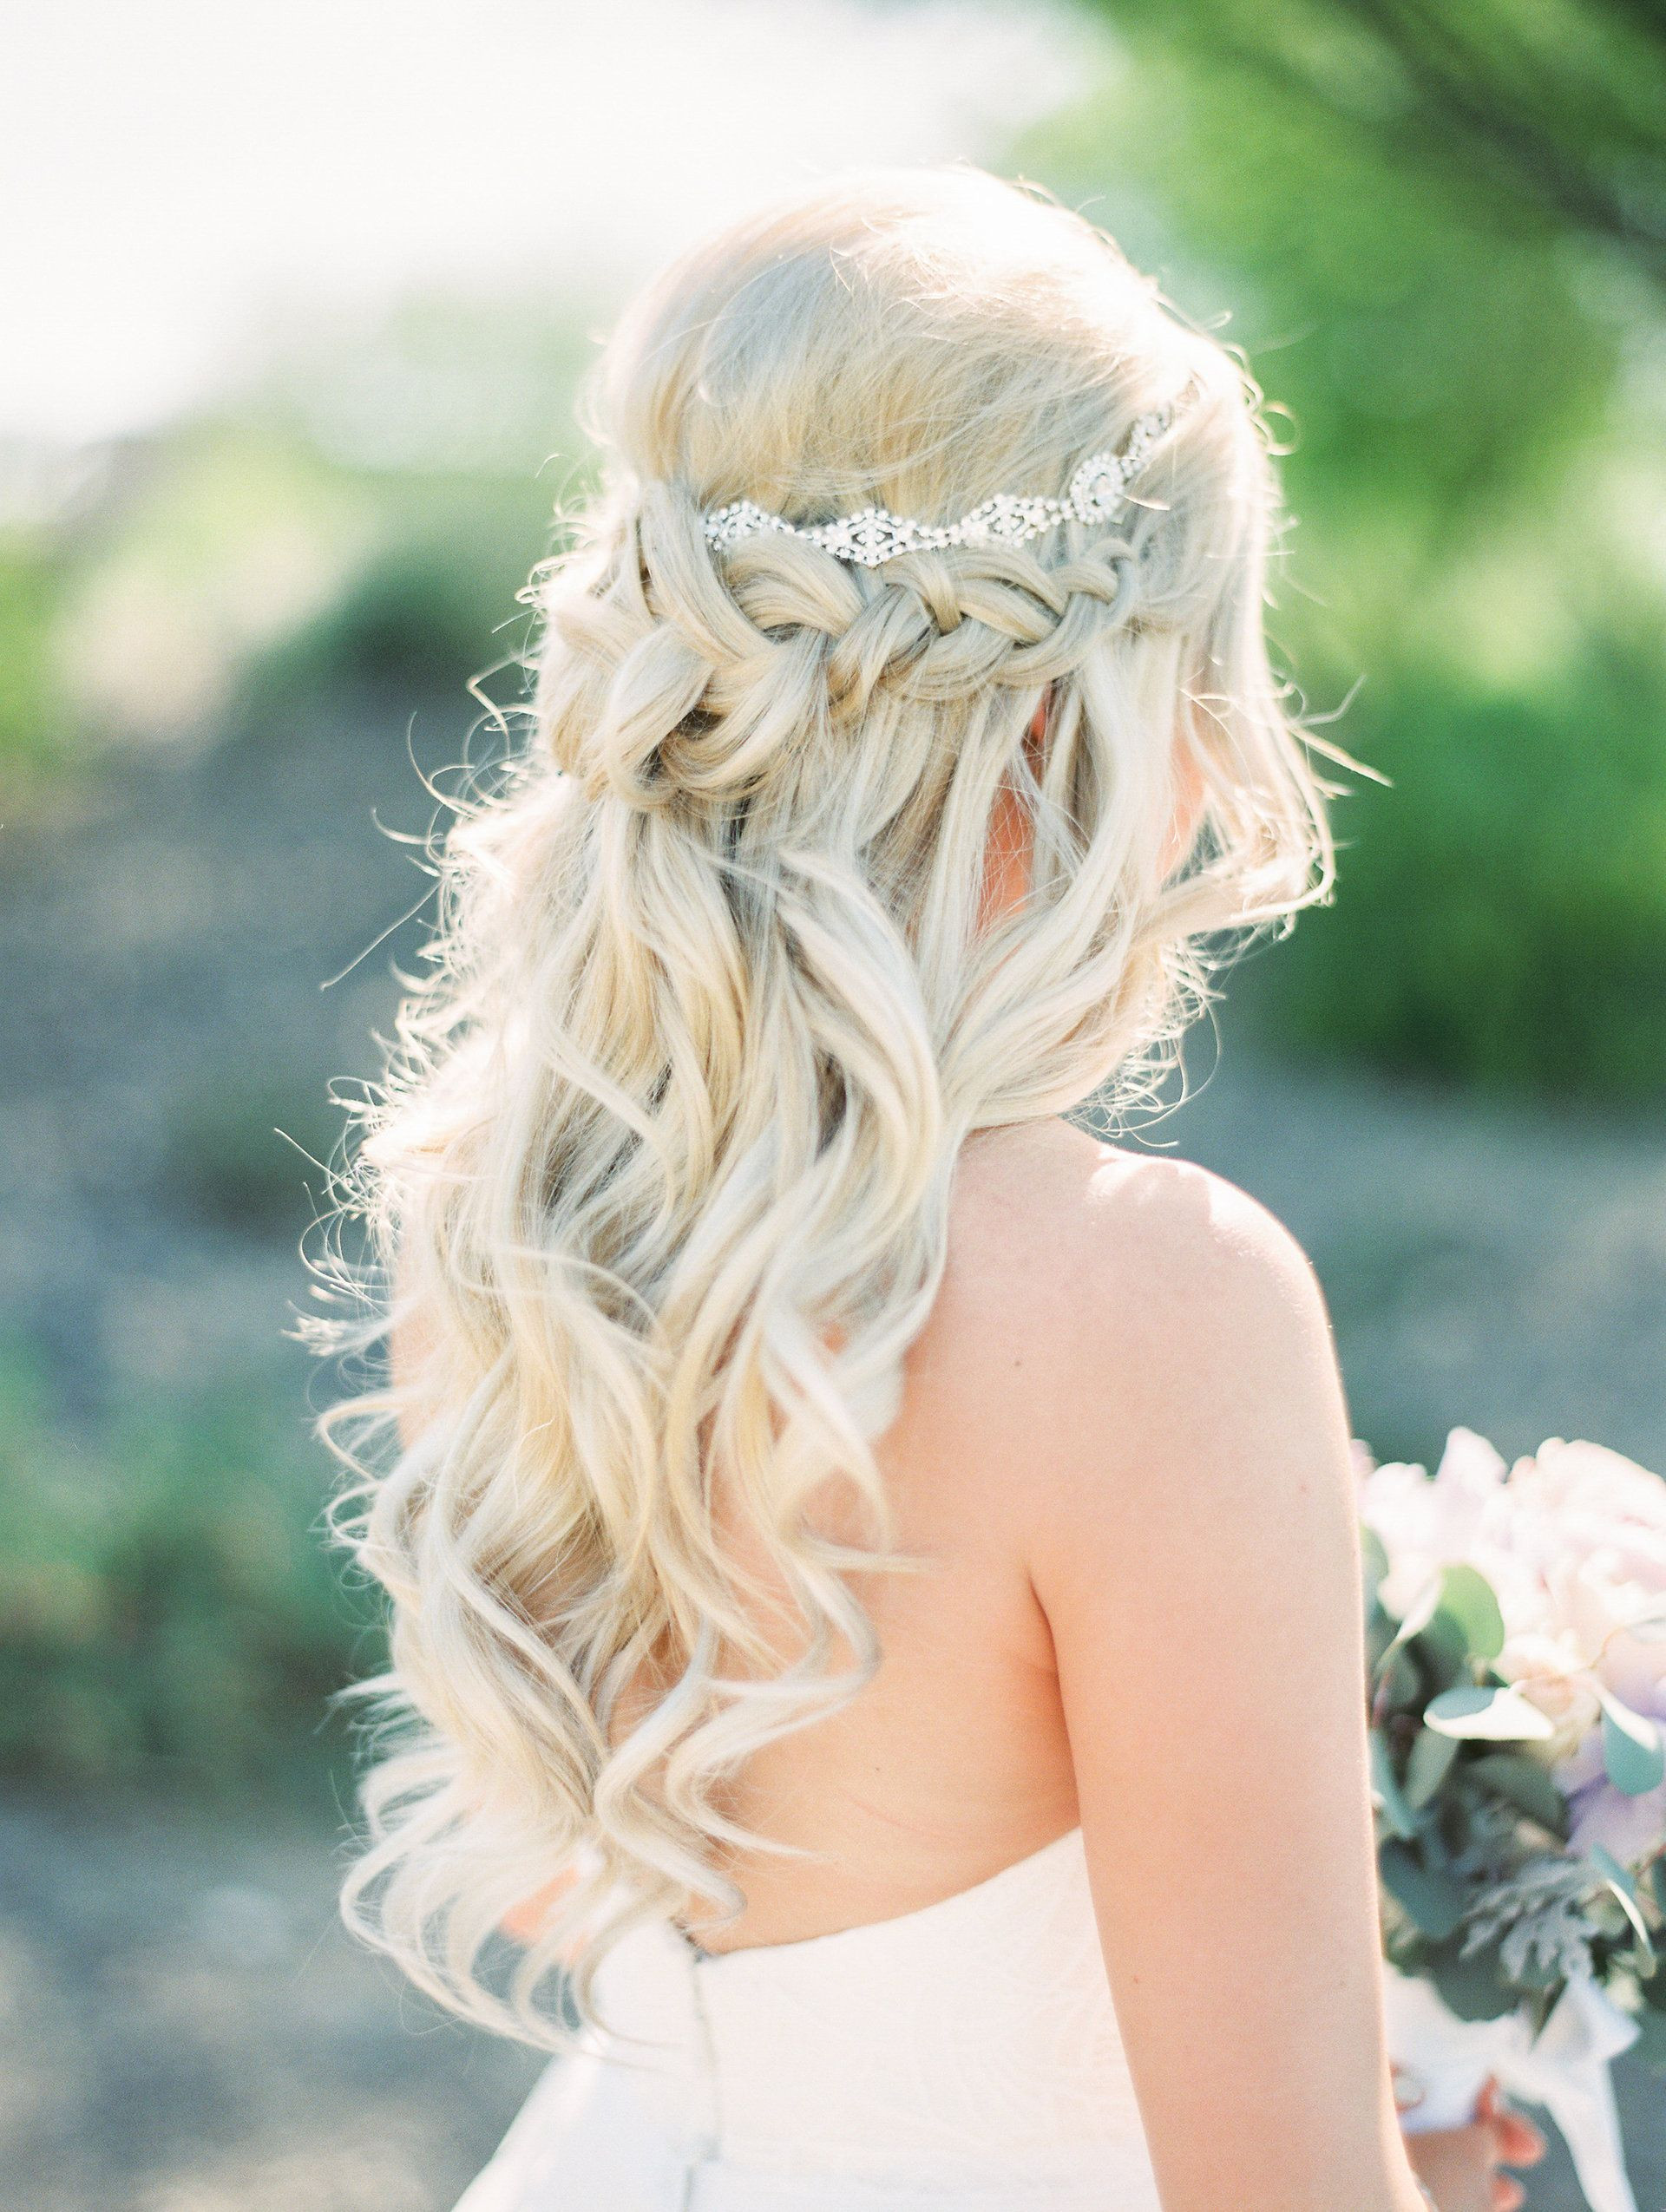 Wedding Hairstyles For Blonde Hair
 Perfect long blonde curls bridal hair fit for a princess